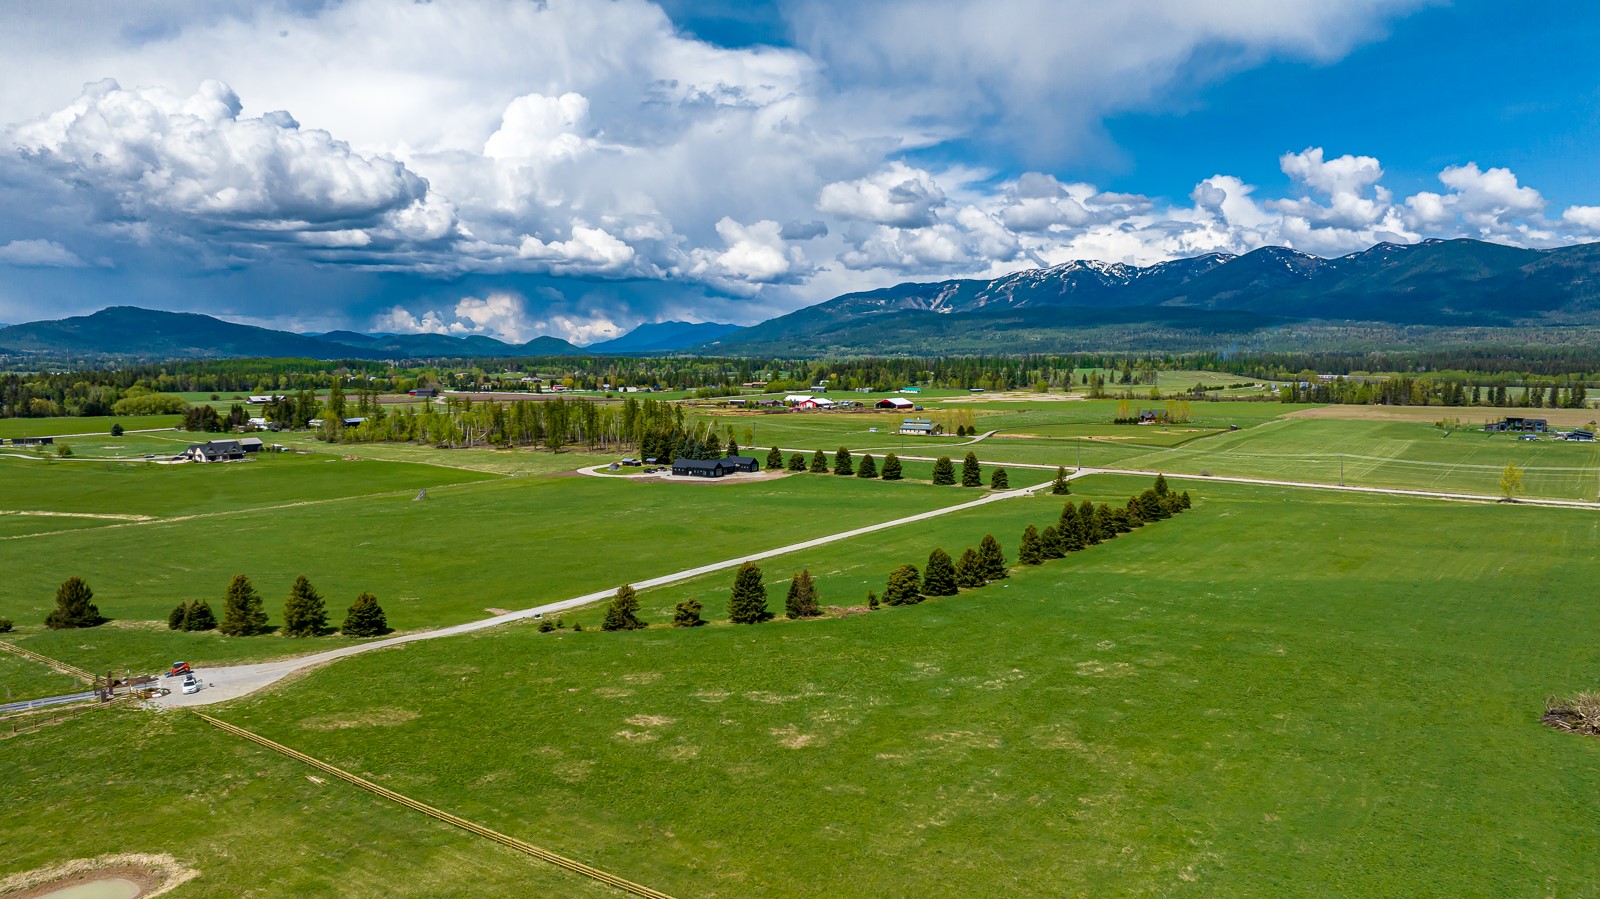 Wide open space, acreage & 360-degree views! Comprised of two parcels, this 40-acre property gifts you with the feel of country living yet is within just 10 minutes of downtown Whitefish. Zoned AG-20, the horse friendly beauty showcases panoramic views, mature trees, level terrain and peaceful quietude. All this property needs is your vision and creativity for your Montana masterpiece! Call Sean Averill, 406-253-3010, Cjay Clark, 970-209-1050 or your real estate professional for more information.